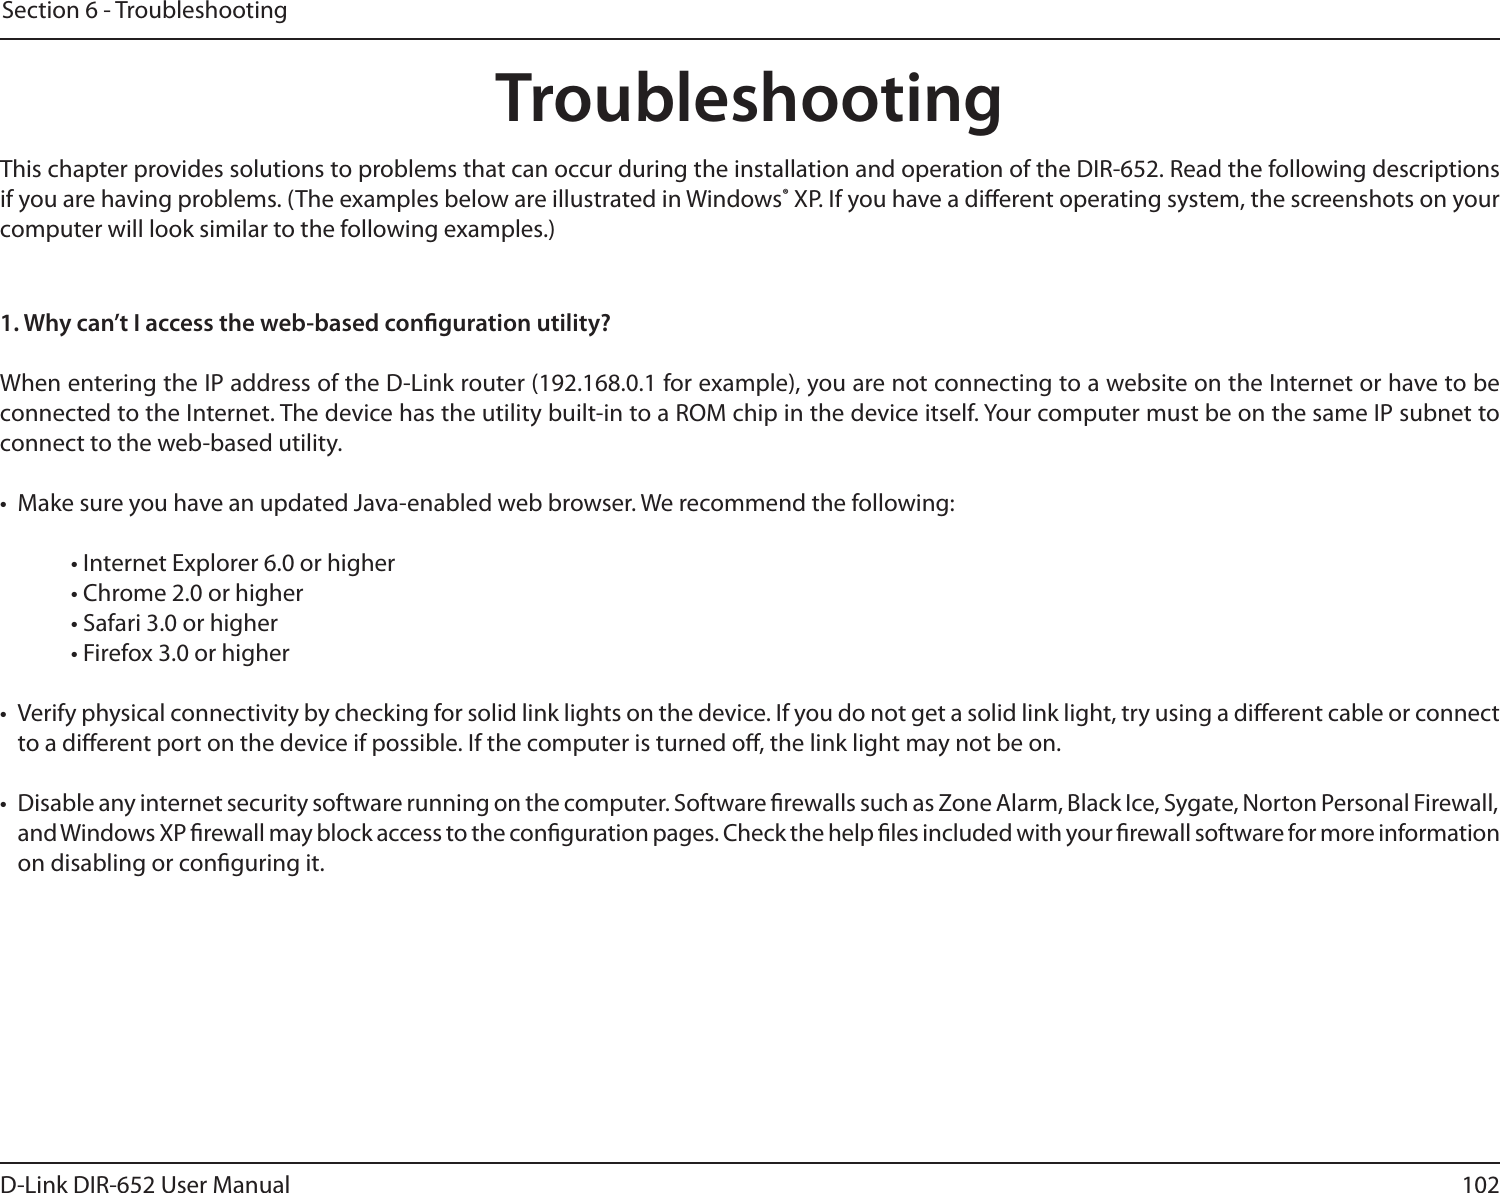 102D-Link DIR-652 User ManualSection 6 - TroubleshootingTroubleshootingThis chapter provides solutions to problems that can occur during the installation and operation of the DIR-652. Read the following descriptions if you are having problems. (The examples below are illustrated in Windows® XP. If you have a dierent operating system, the screenshots on your computer will look similar to the following examples.)1. Why can’t I access the web-based conguration utility?When entering the IP address of the D-Link router (192.168.0.1 for example), you are not connecting to a website on the Internet or have to be connected to the Internet. The device has the utility built-in to a ROM chip in the device itself. Your computer must be on the same IP subnet to connect to the web-based utility. •  Make sure you have an updated Java-enabled web browser. We recommend the following: • Internet Explorer 6.0 or higher • Chrome 2.0 or higher • Safari 3.0 or higher • Firefox 3.0 or higher •  Verify physical connectivity by checking for solid link lights on the device. If you do not get a solid link light, try using a dierent cable or connect to a dierent port on the device if possible. If the computer is turned o, the link light may not be on.•  Disable any internet security software running on the computer. Software rewalls such as Zone Alarm, Black Ice, Sygate, Norton Personal Firewall, and Windows XP rewall may block access to the conguration pages. Check the help les included with your rewall software for more information on disabling or conguring it.